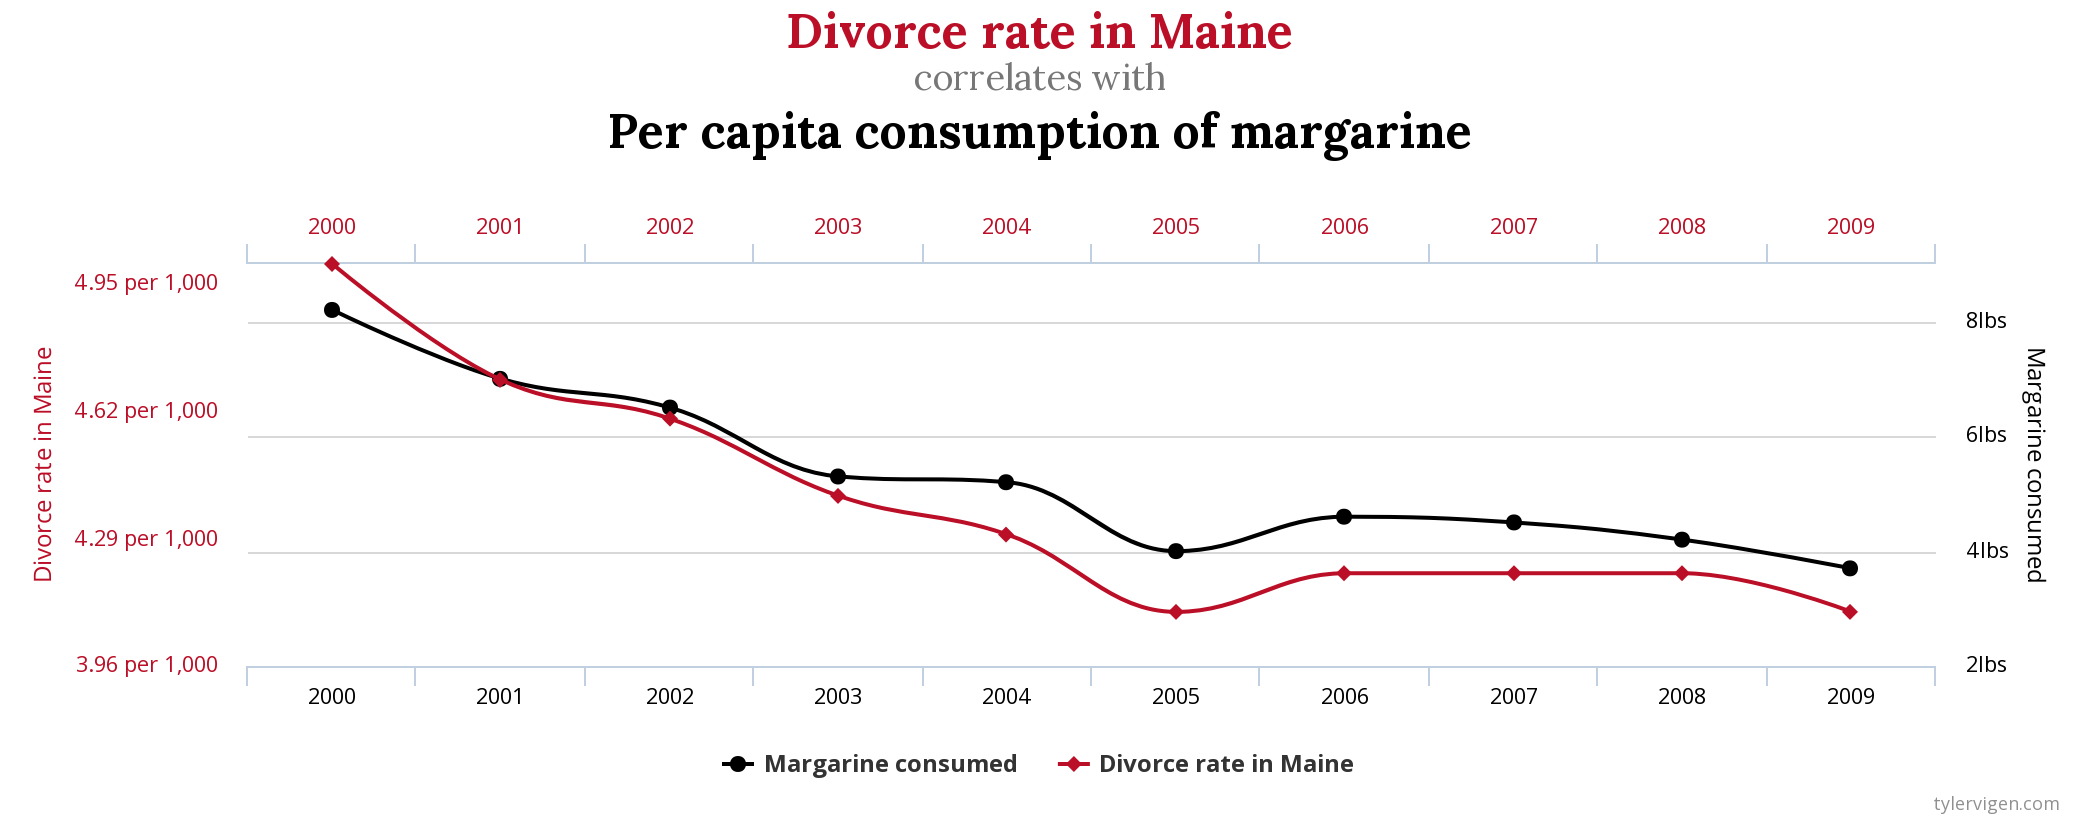 Chart of Divorce Rate in Maine compared with Per capita consumption of margarine, which correlates 99.26%. The graph shows lines for divorce and margarine from 2000 to 2009. Both lines generally decline, but the places where they decline steeper or shallow out line up.